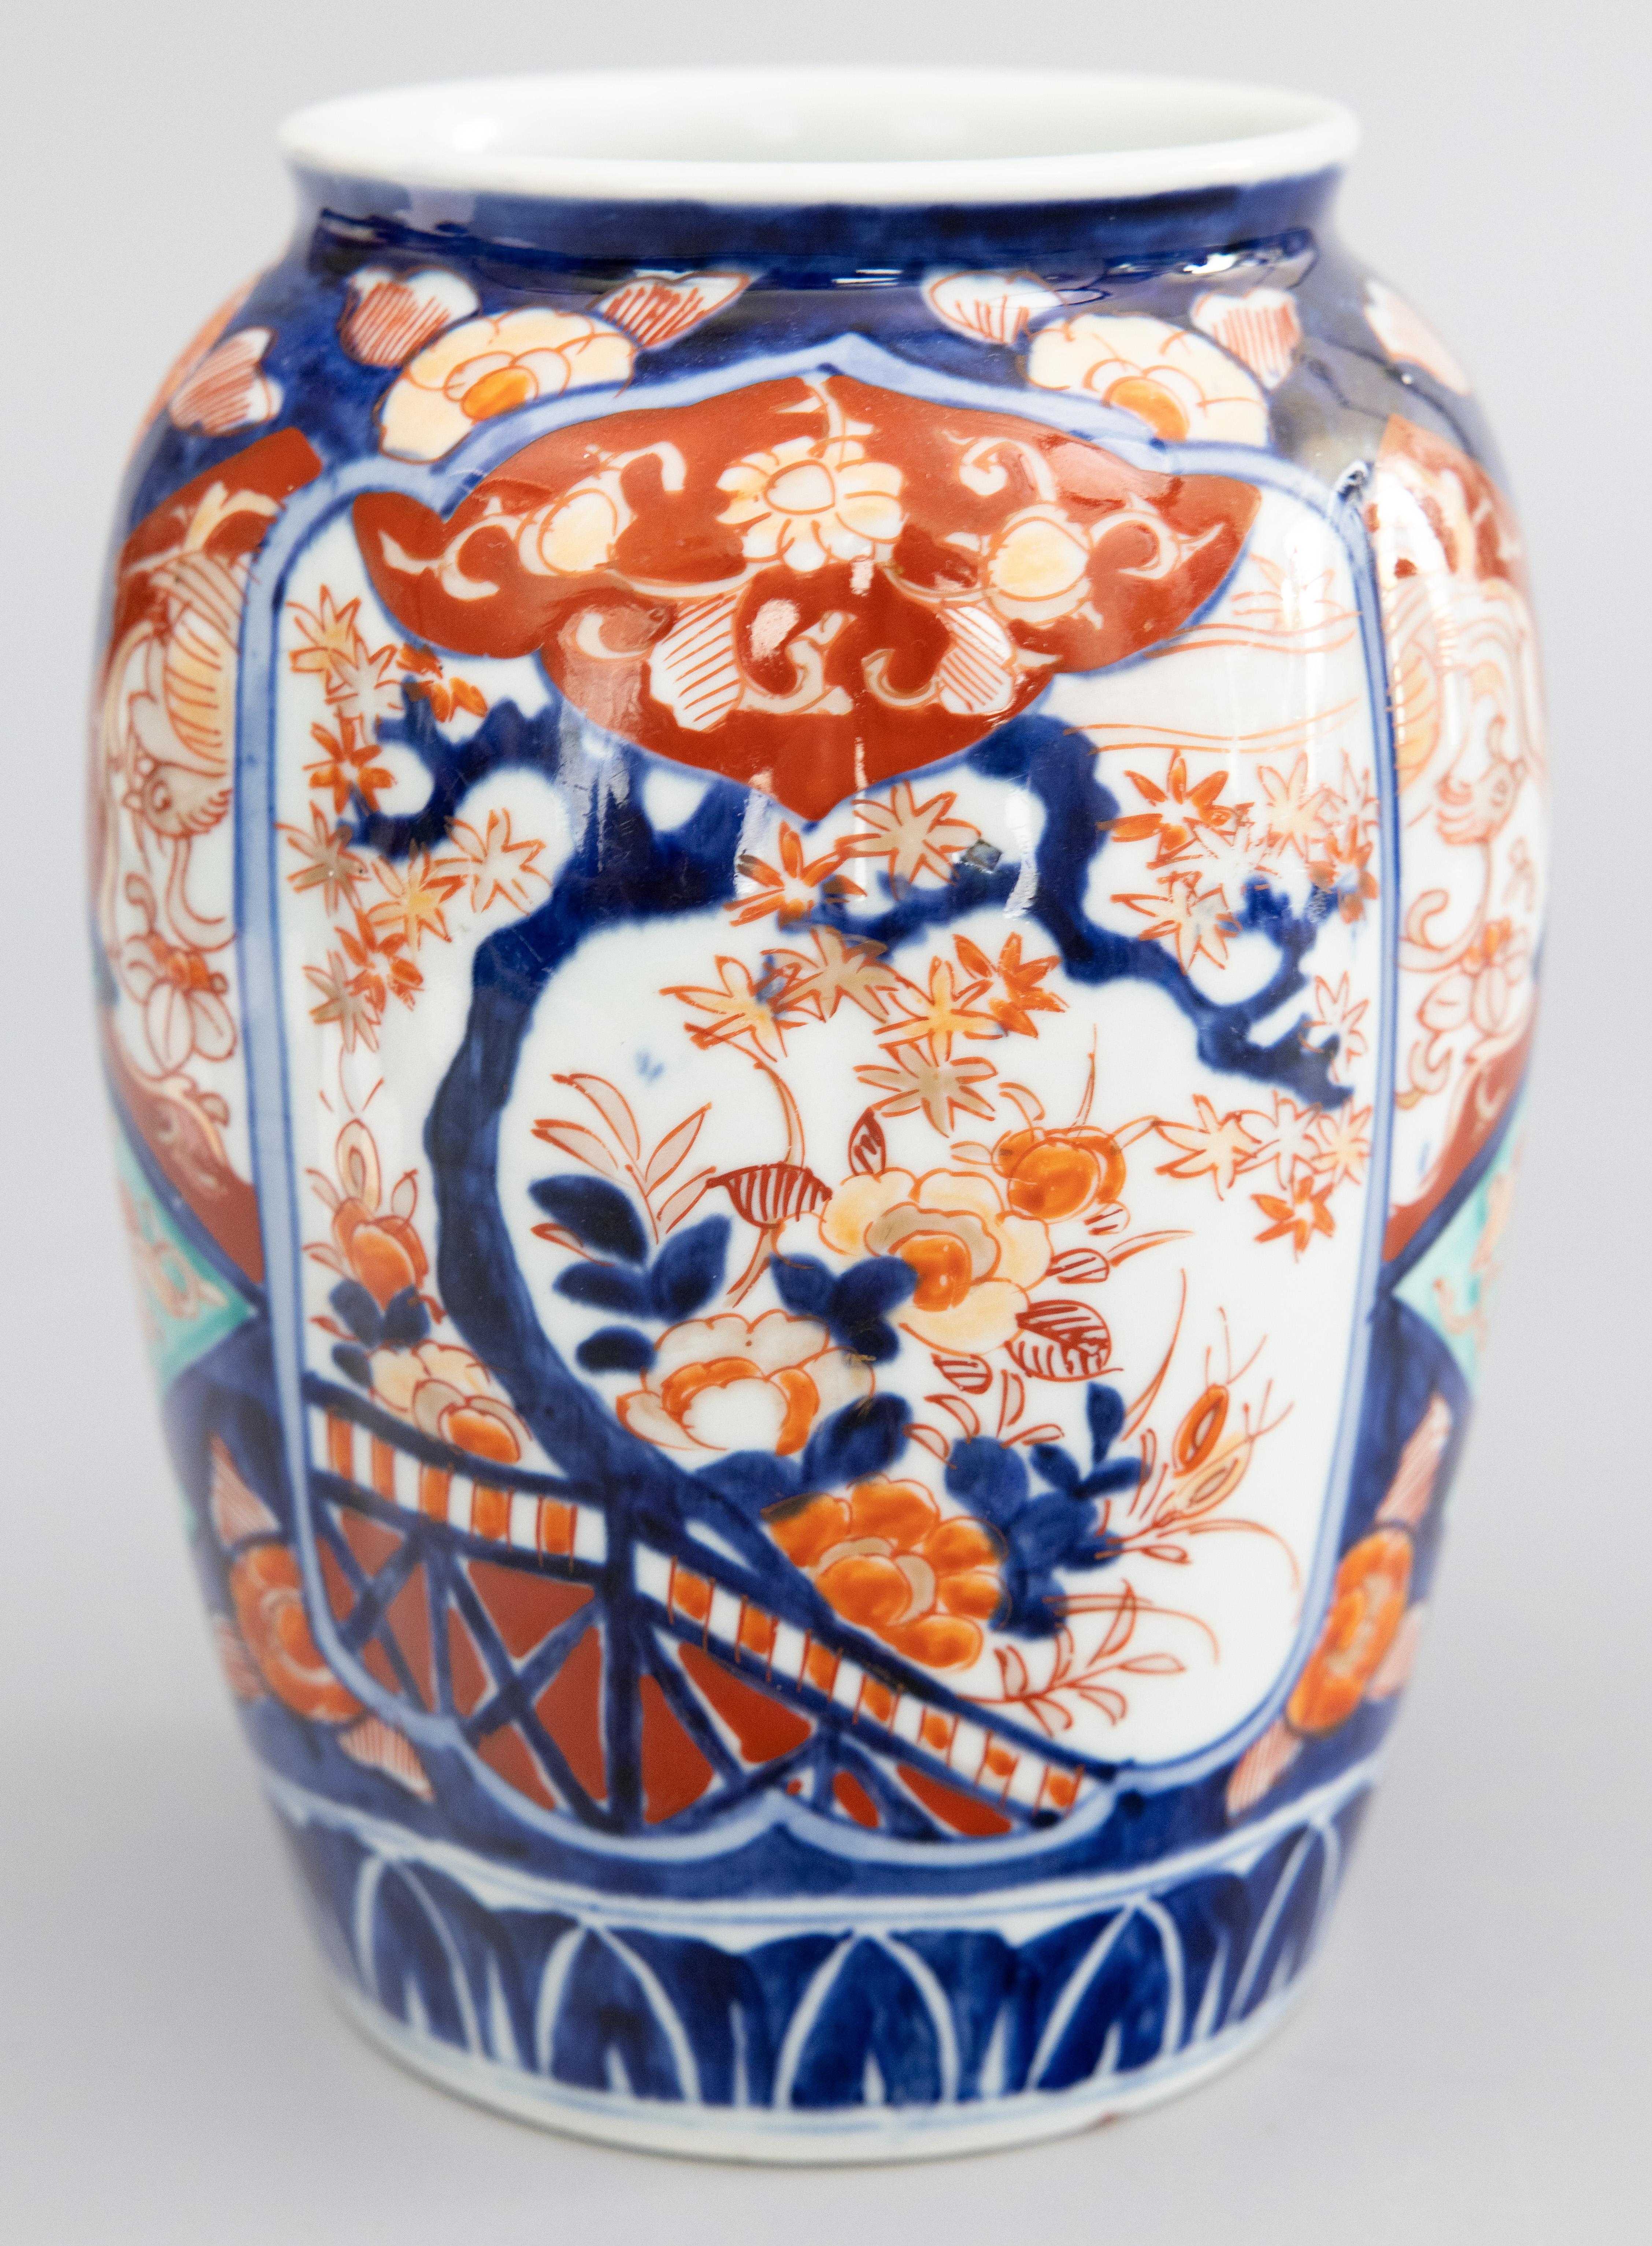 A gorgeous antique 19th-Century Japanese Imari vase made in the Meiji period, circa 1870. This fine vase has a lovely lobed shape and hand painted floral design in the traditional Imari colors with stunning turquoise accents. It's in beautiful